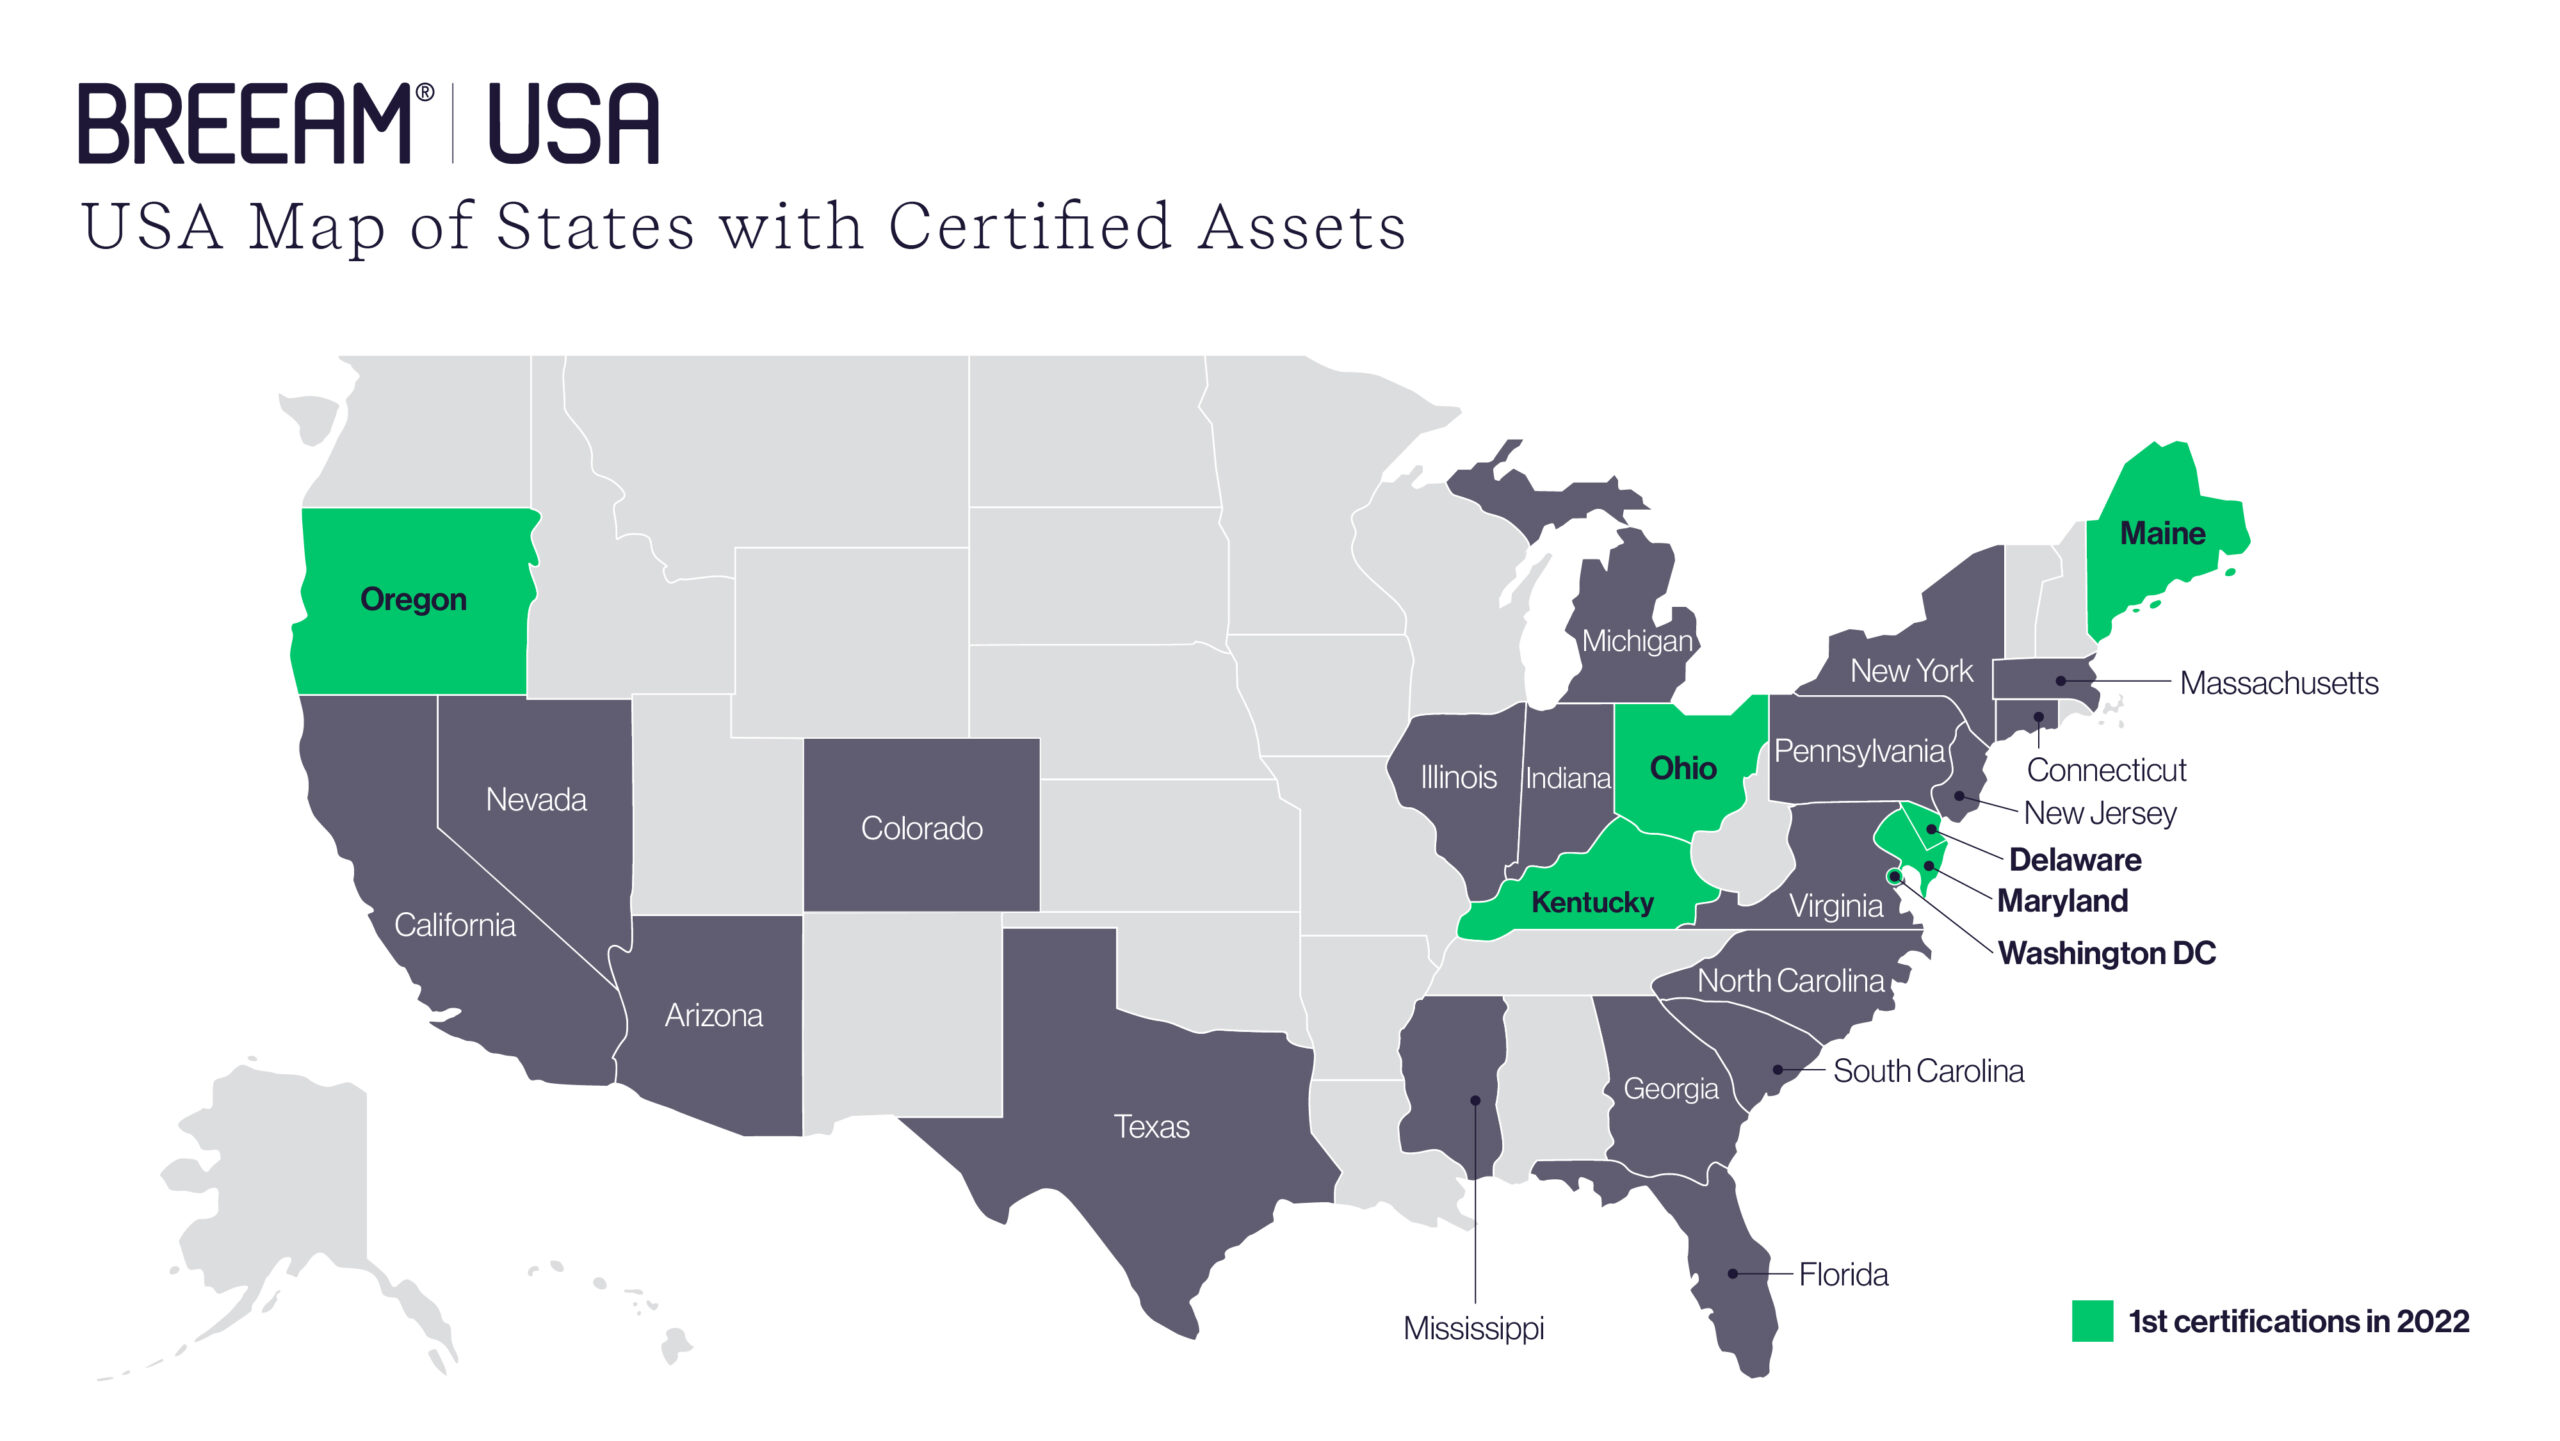 BREEAM USA – USA Map of States with Certified Assets